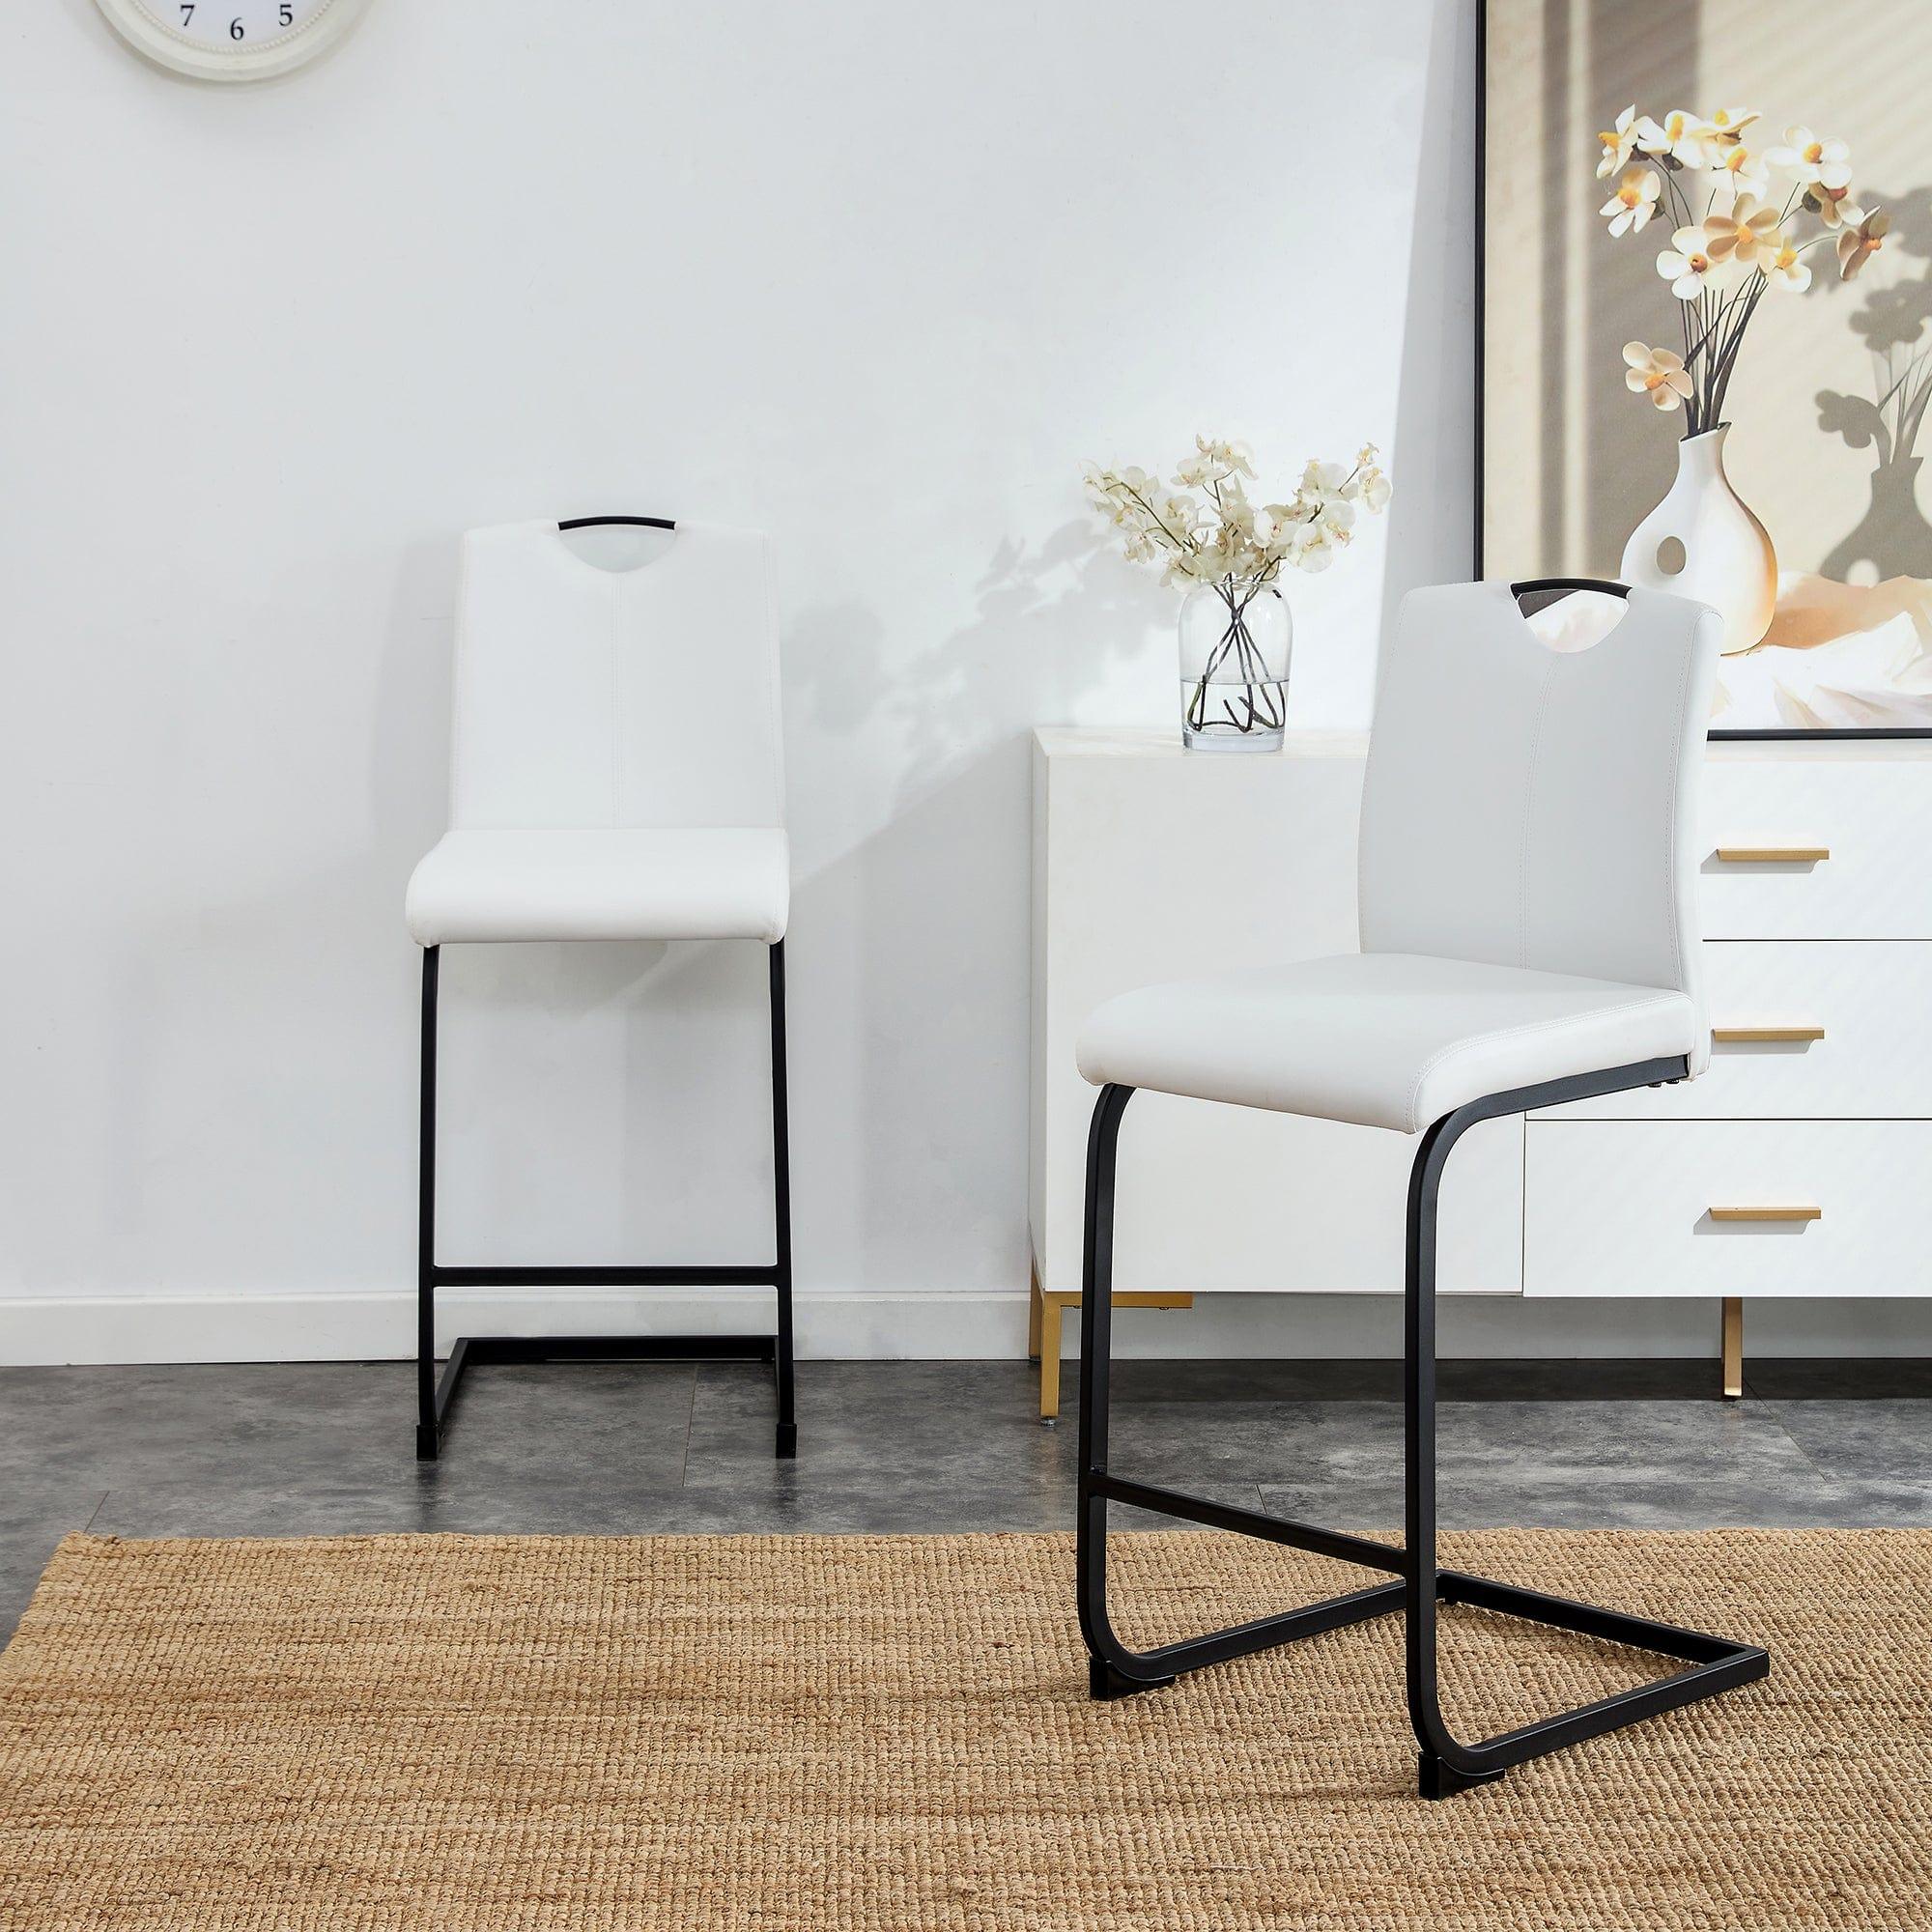 Shop White PU Chair Barstool Dining Counter Height Chair Set of 2 Mademoiselle Home Decor